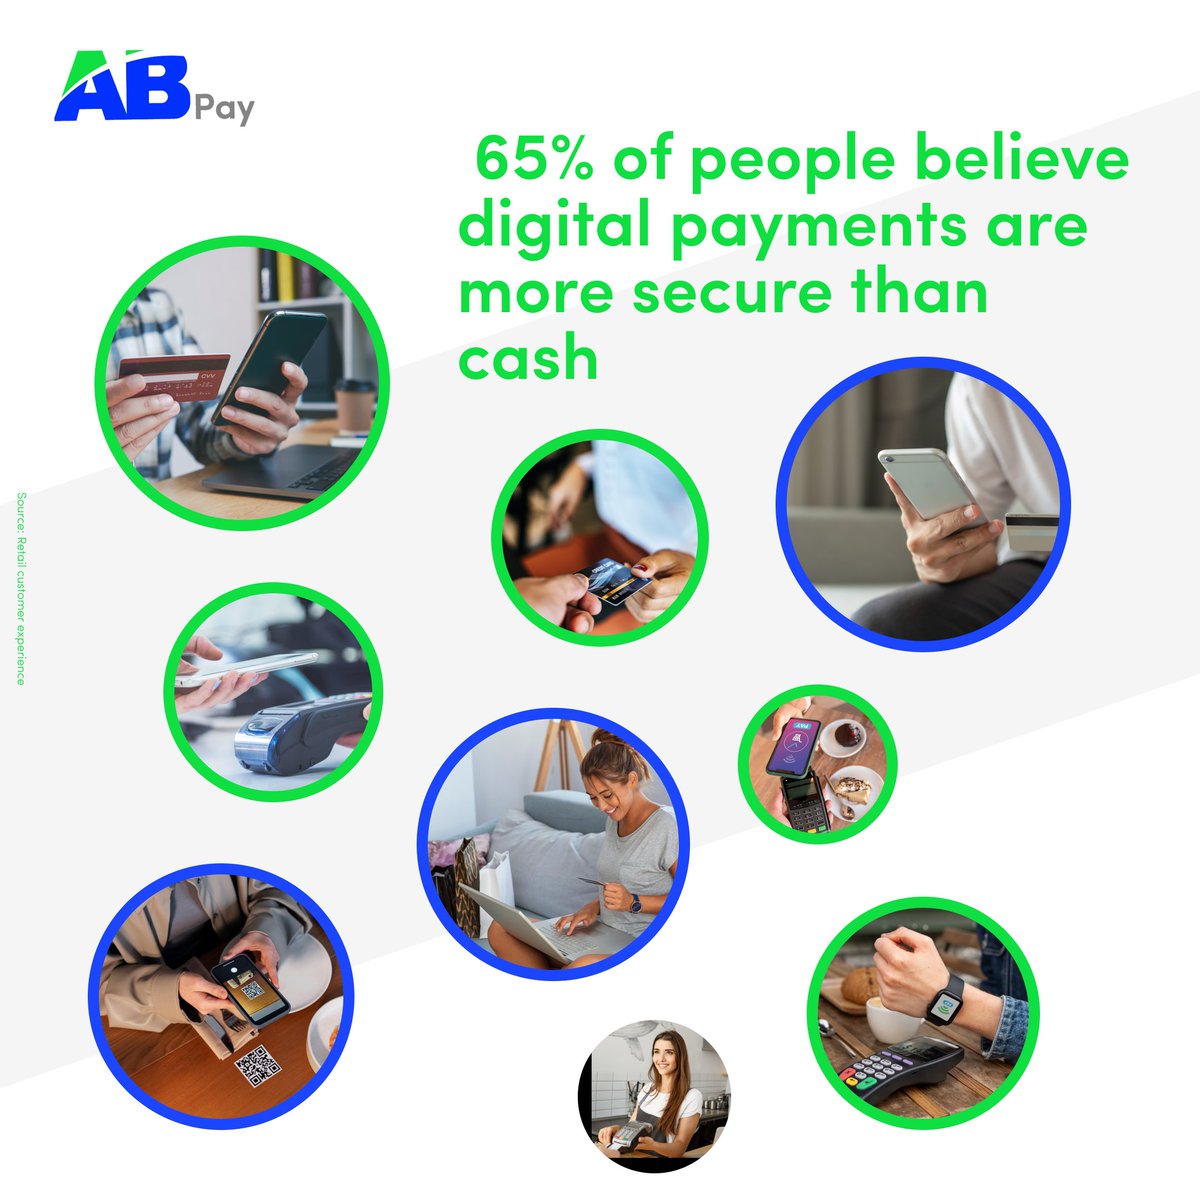 With A&B PAY, access to the latest innovative technology on the AB PAY like Apple Pay, PayPal, and JavaScript Encryption.

#abpayus #Finances #MerchantServices #PointOfSale #businessowner #paymentprocessing #onlineshoping #credicardprocessing #contactless #ContactlessPayment